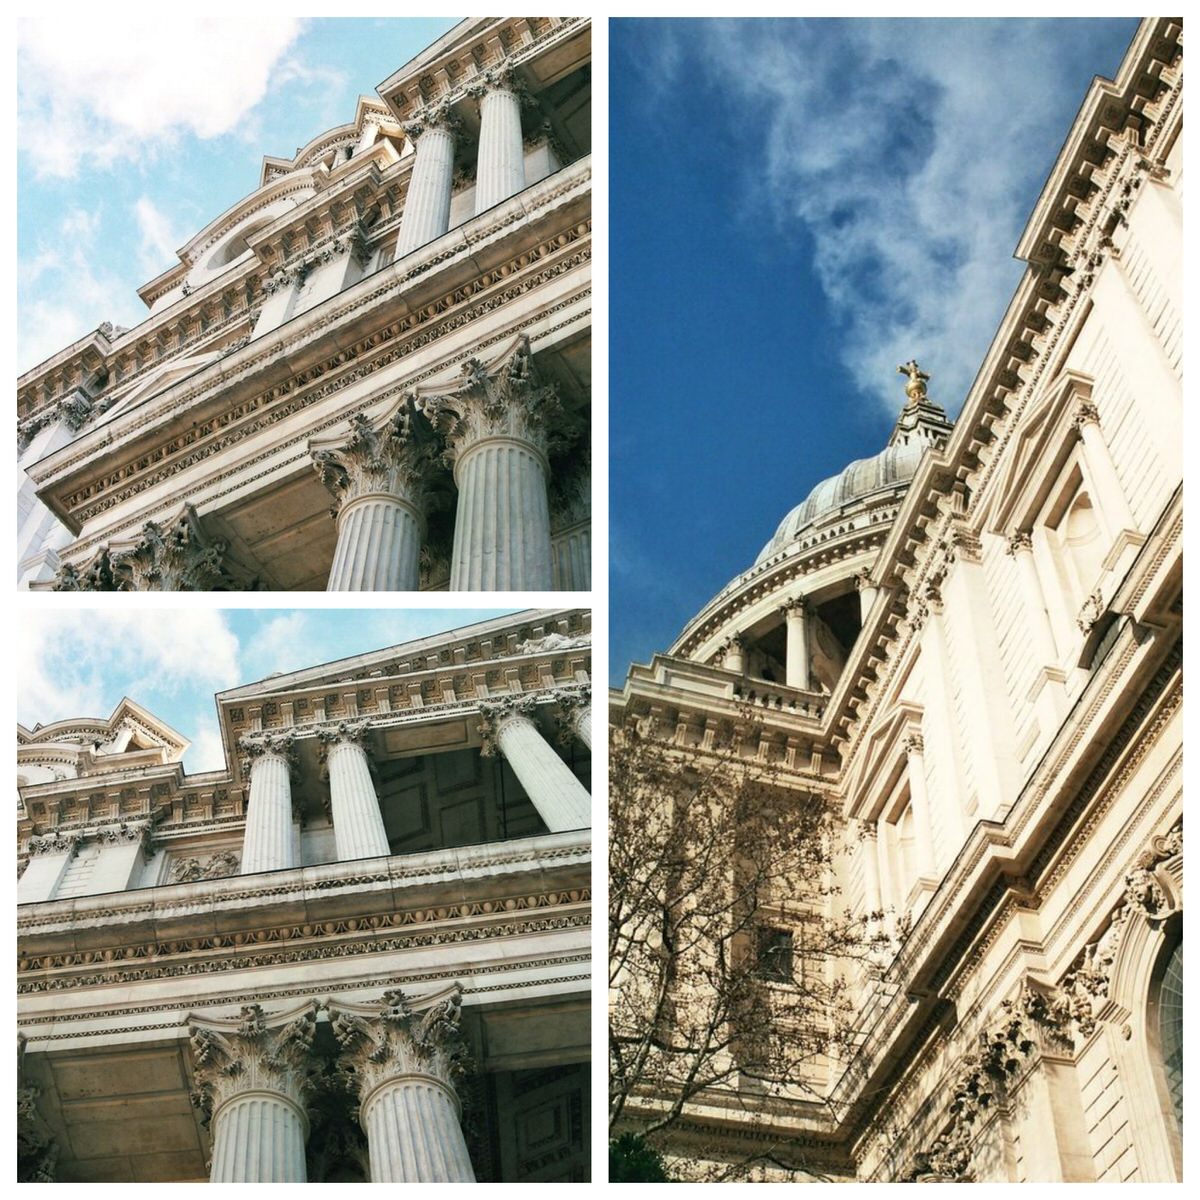 Saint Paul's Cathedral from different angles